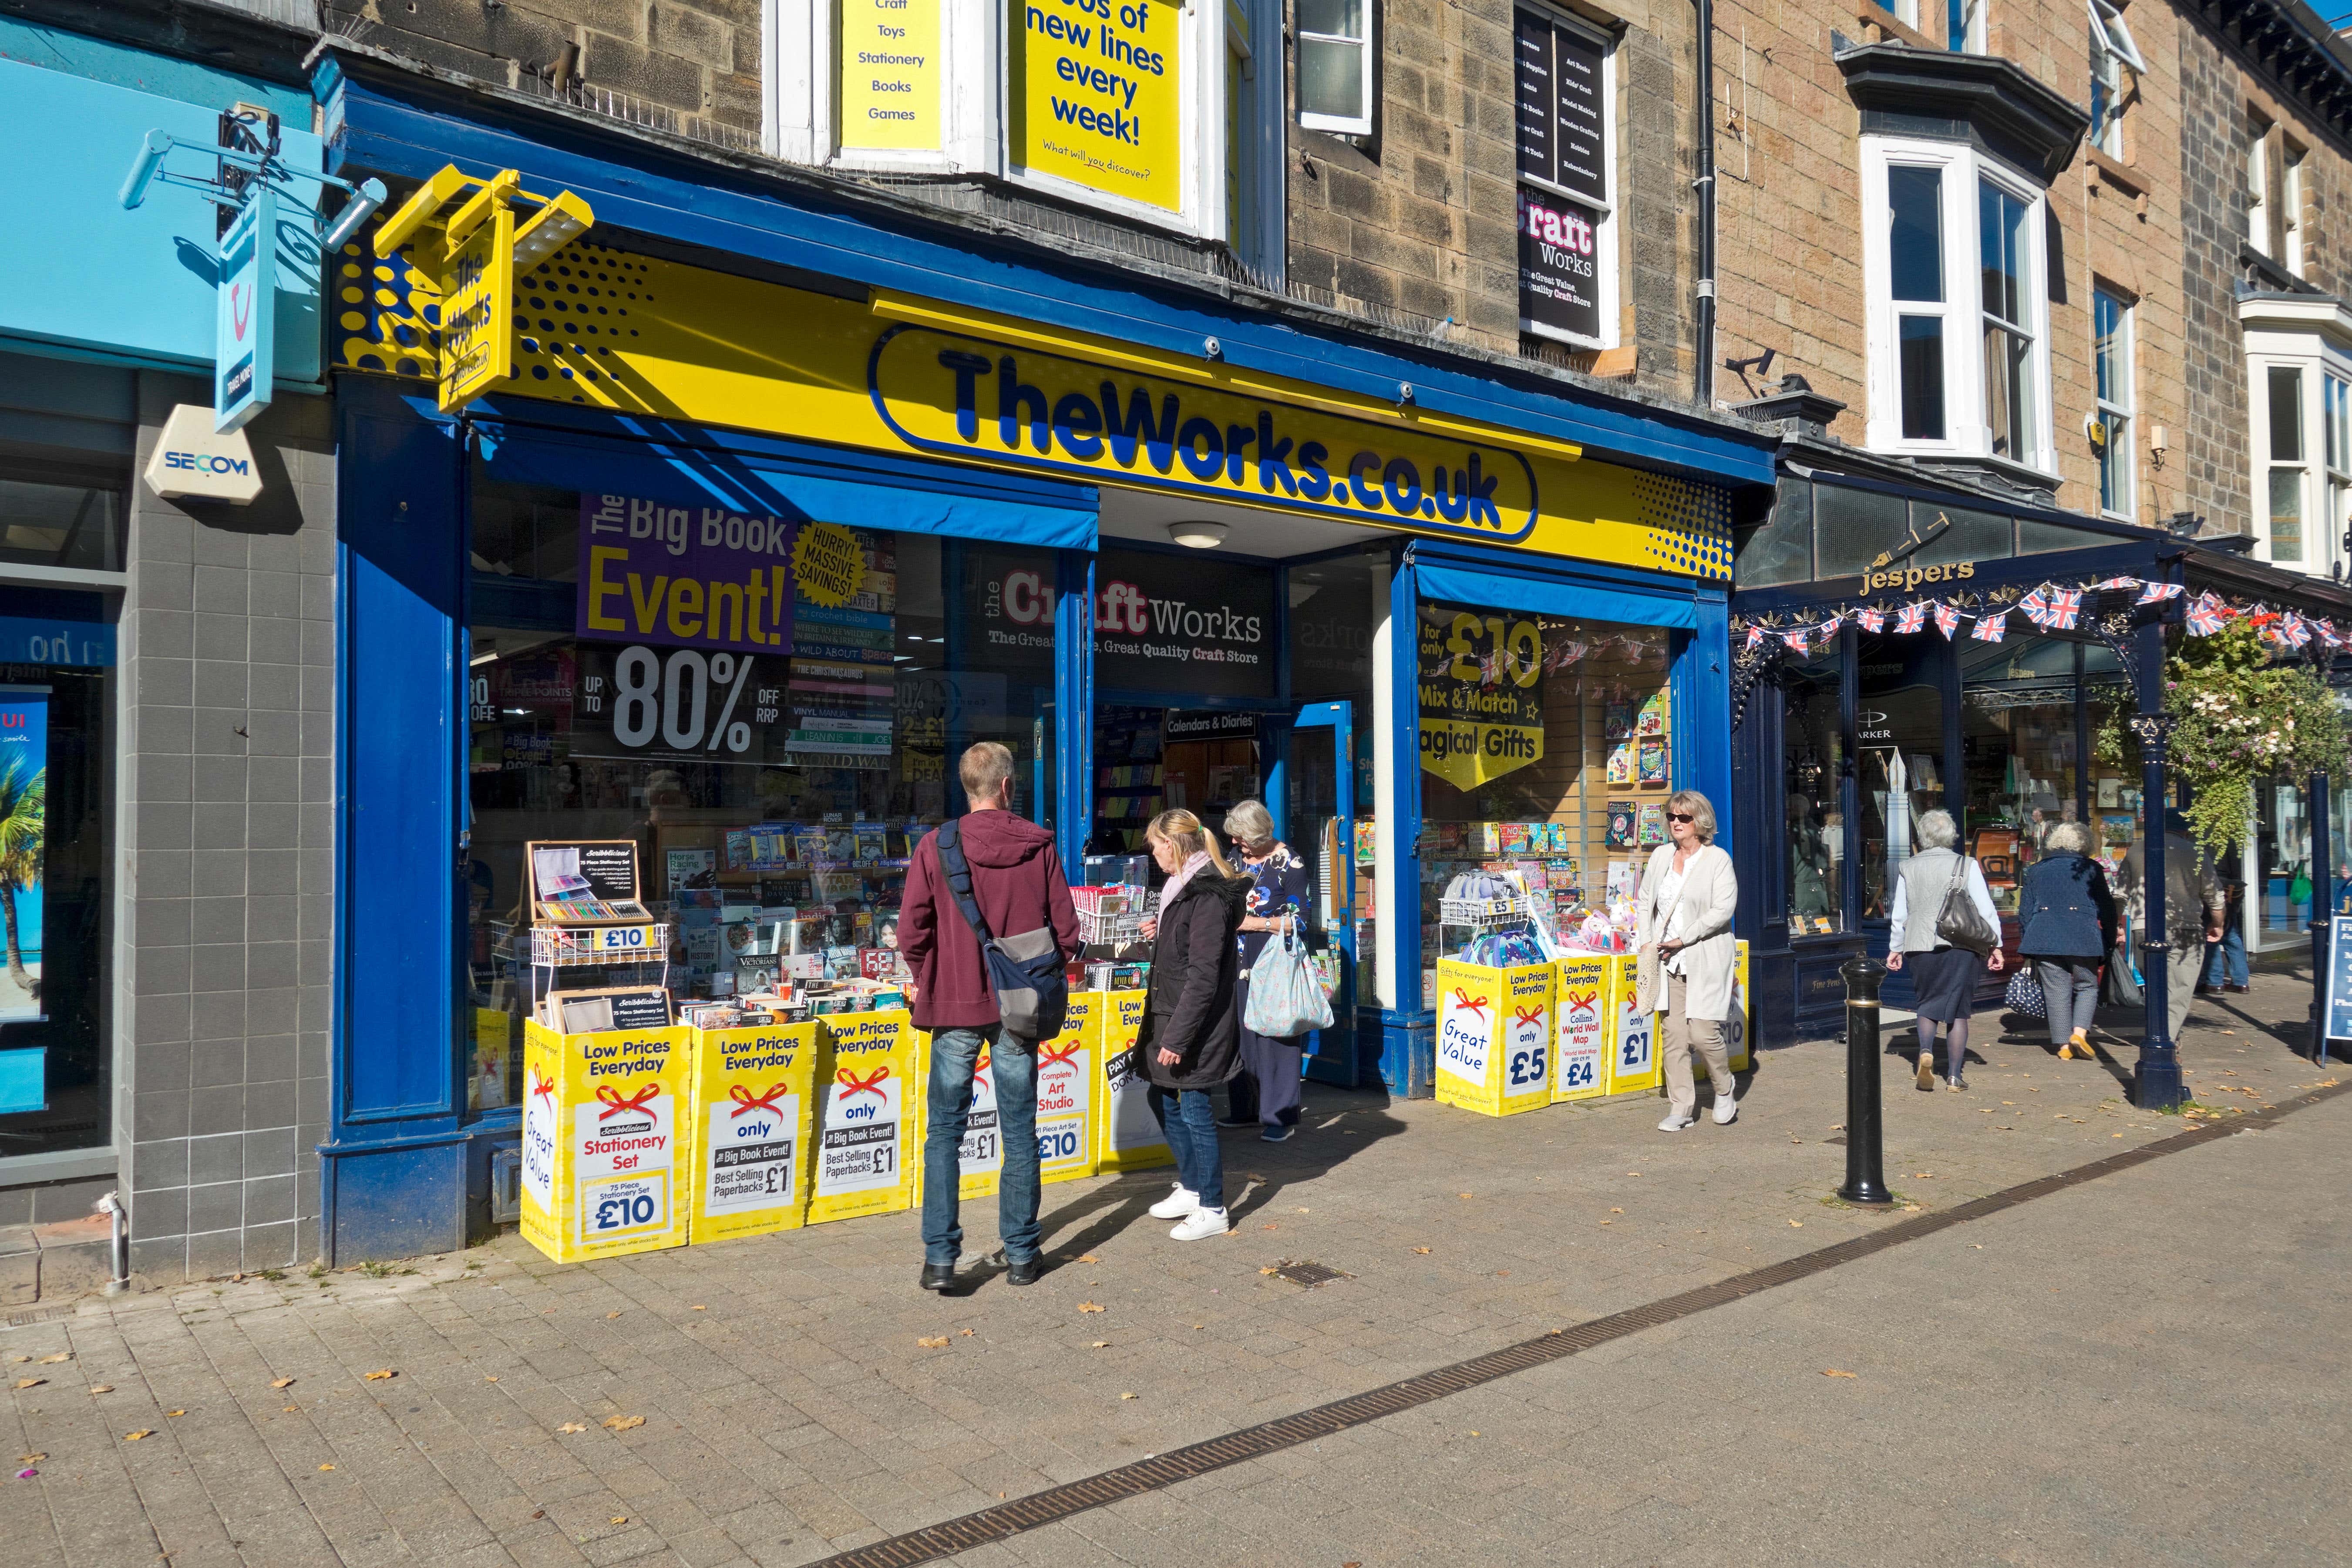 The stationery and books retailer saw shares slide as much as 20% in early trading (Alamy/PA)